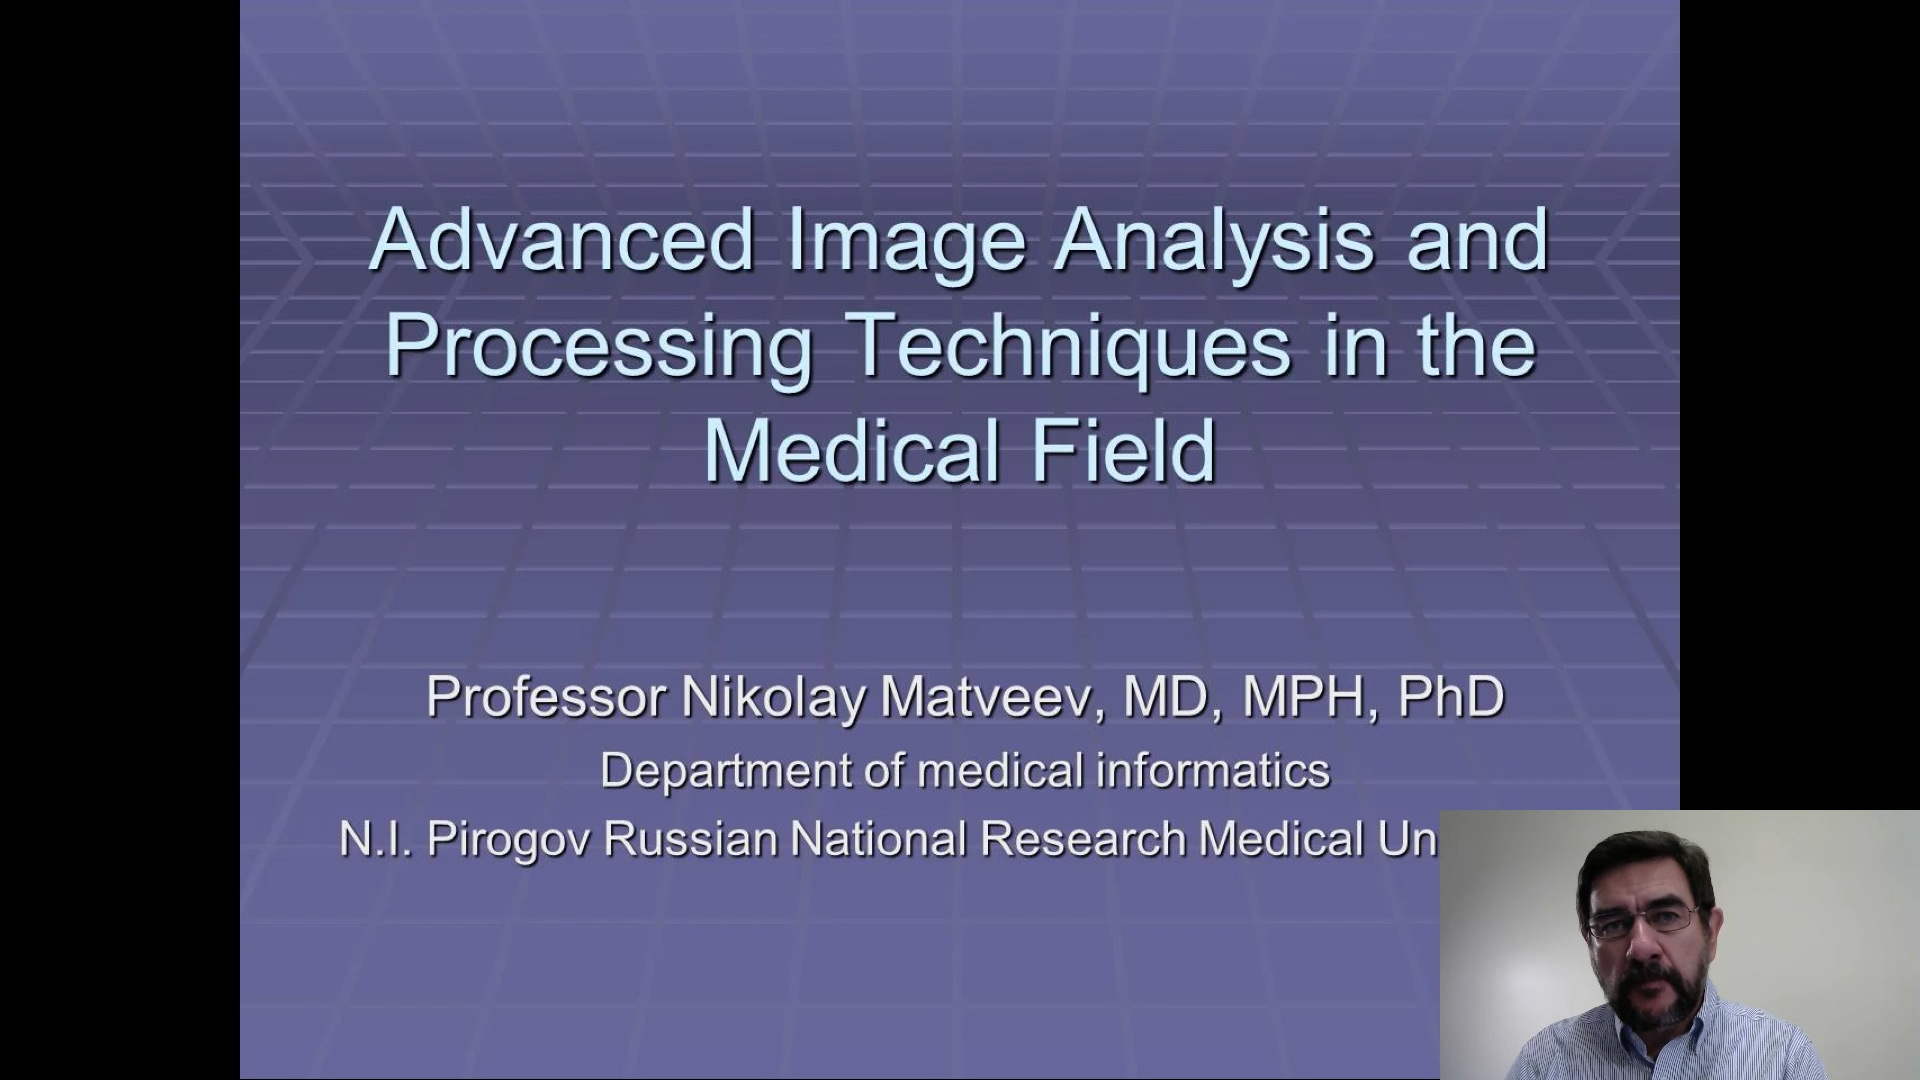 Advanced Image Analysis and Processing Techniques in the Medical Field